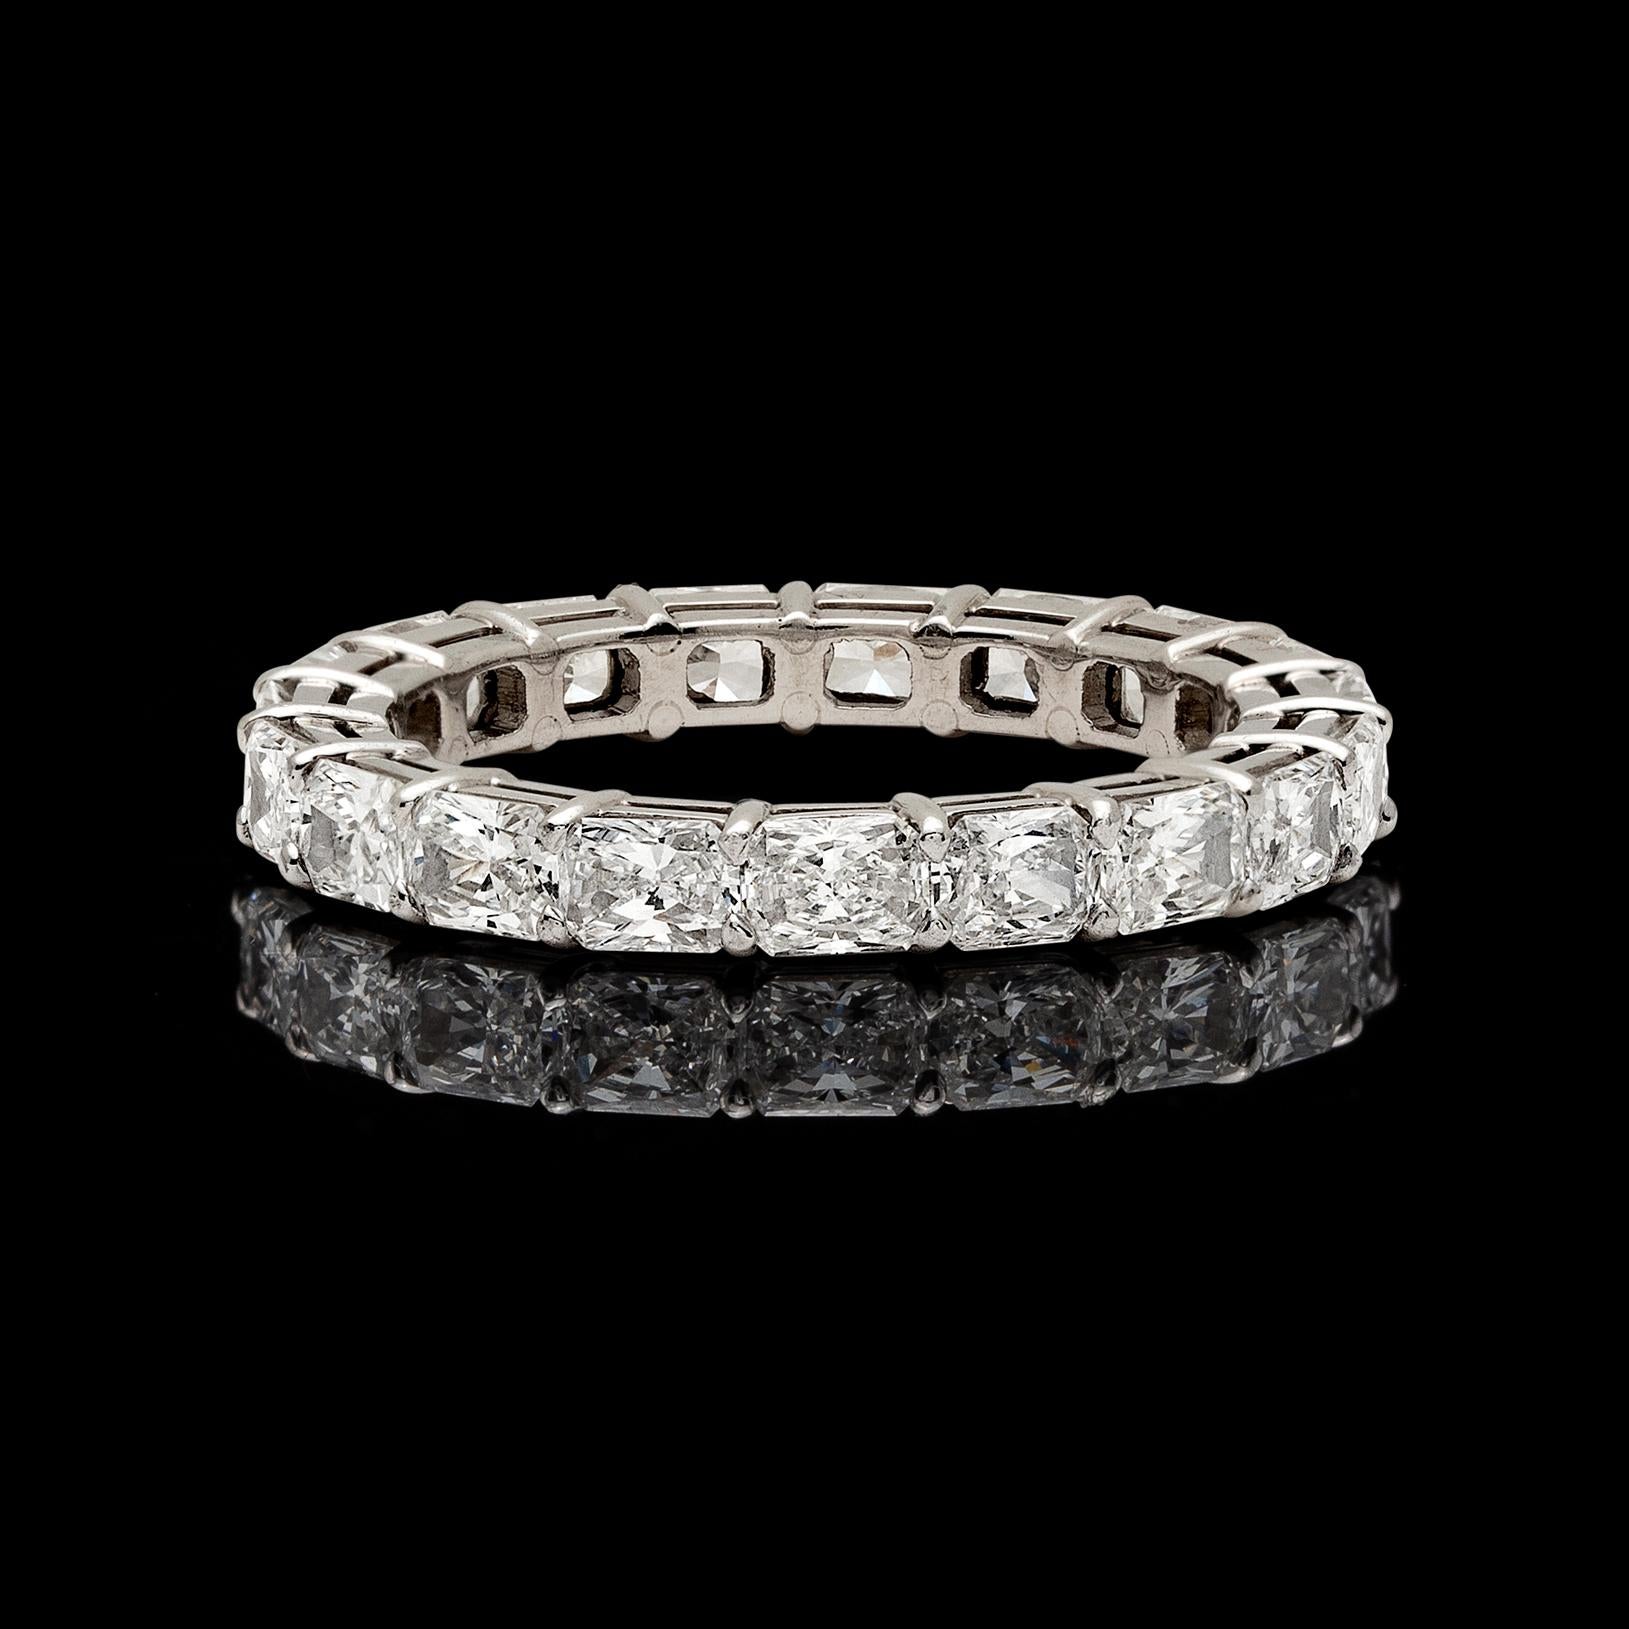 Shipping/Returns
A ring to love for eternity! A unique platinum wedding band featuring 19 radiant-cut diamonds set horizontally fully around the ring. The estimated total diamond weight is 3.40cts,  the ring weighs 3.84 grams, and fits a finger size